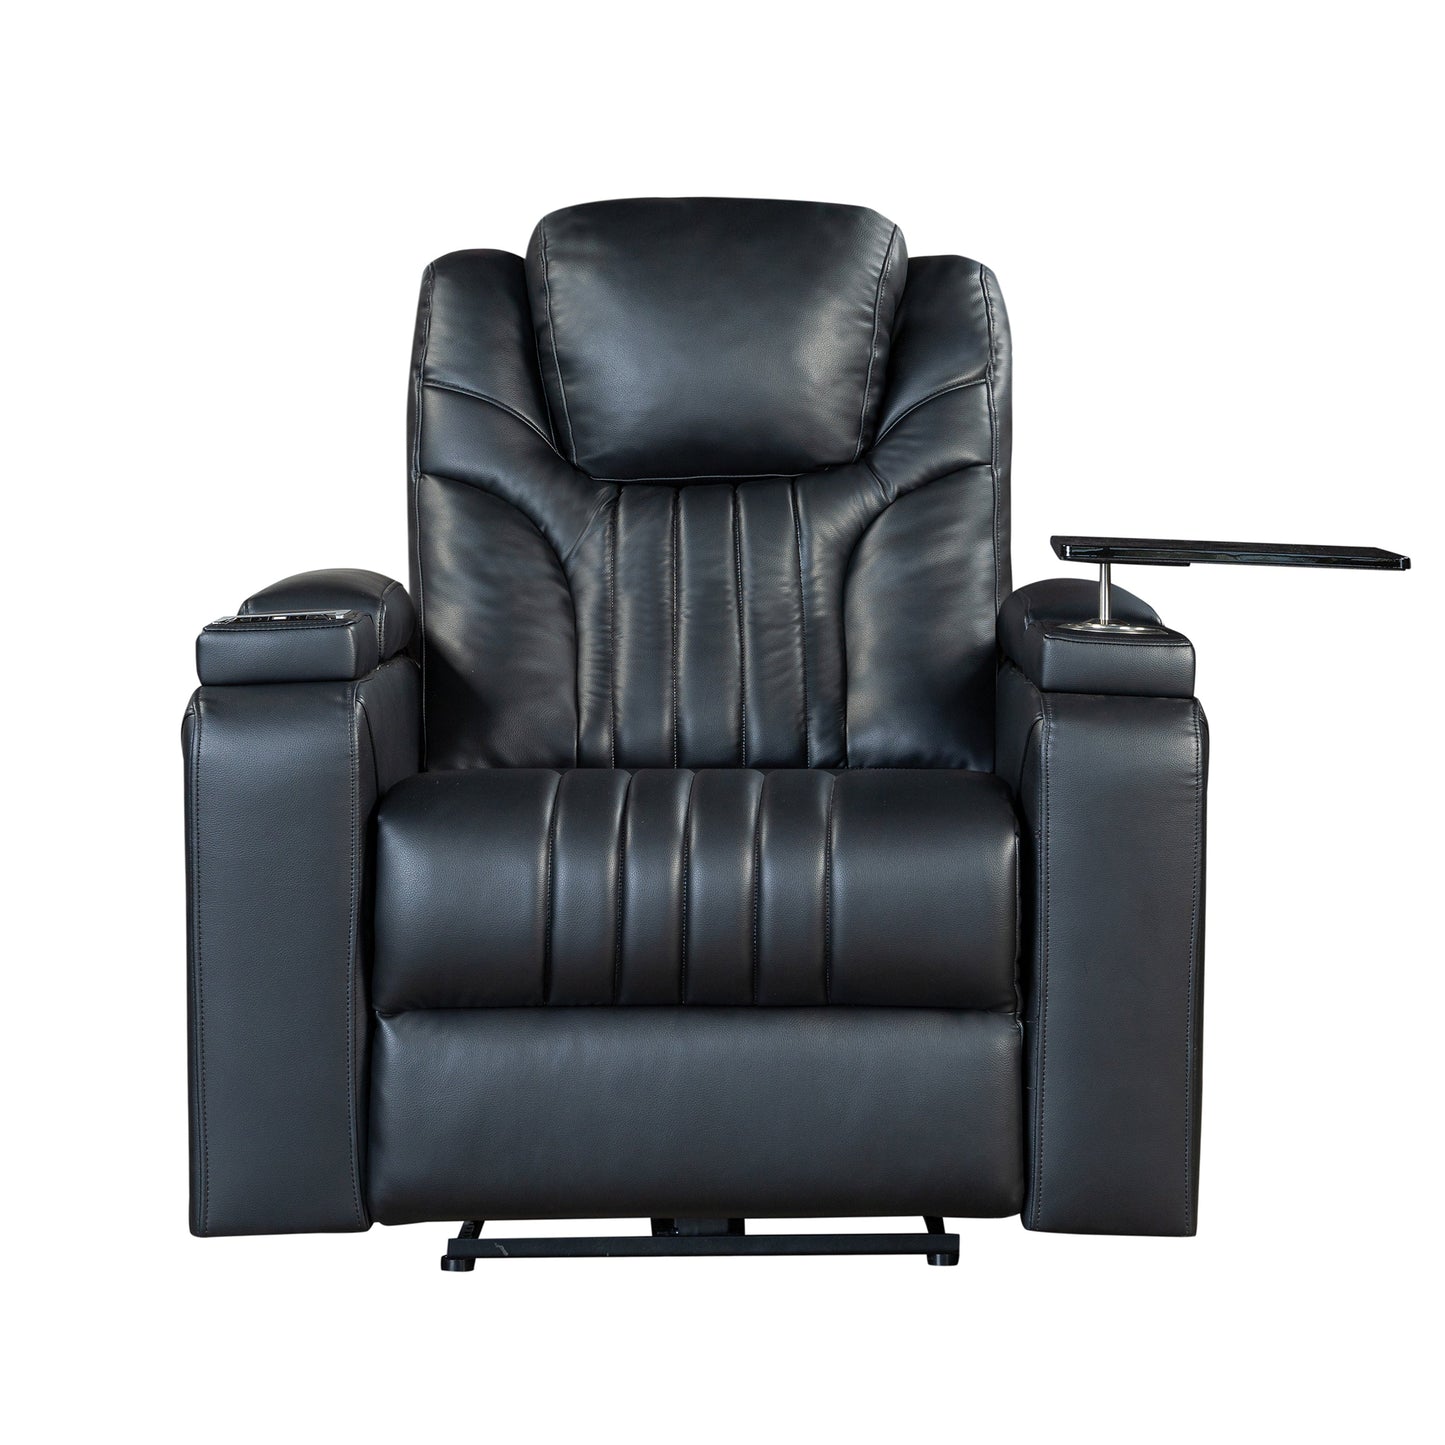 PU Leather Power Recliner Home Theater Recliner with Power Adjustable Headrest, Wireless Charging Device, USB Port, Storage Arms, Cup Holder and Swivel Tray Table for Living Room, Black